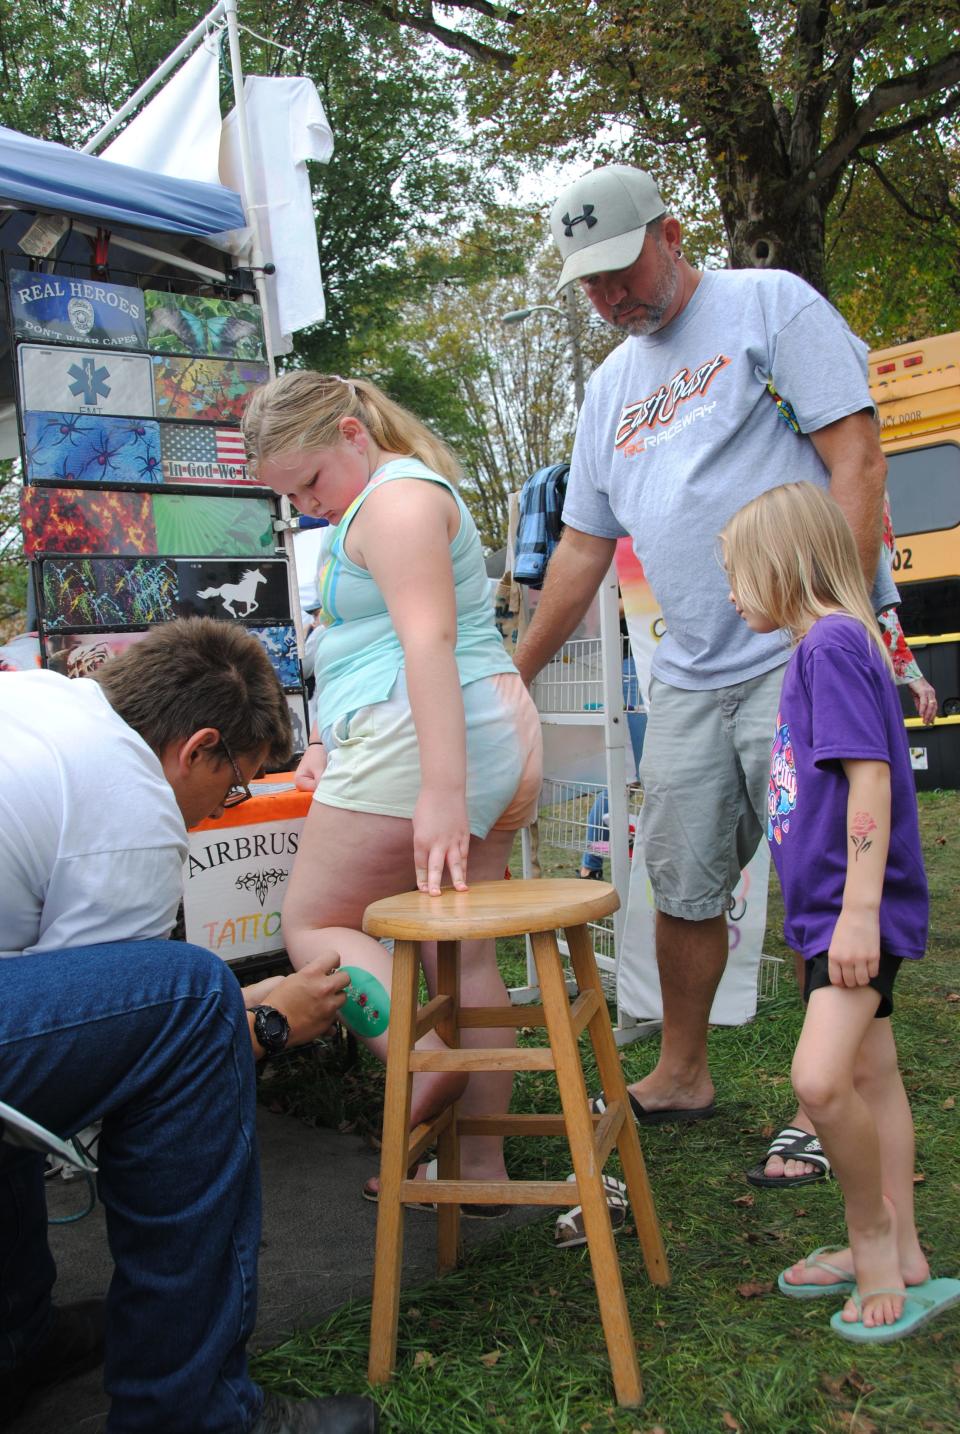 The Airbrush Tattoos artist Ryan Shumaker paints a flower on Miranda McCorkle's leg under the watchful eyes of her dad, Dave, and sister Aubrey, all of Somerset, during last year's annual Confluence PumpkinFest celebration.
(Photo: Staff photo by Madolin Edwards)